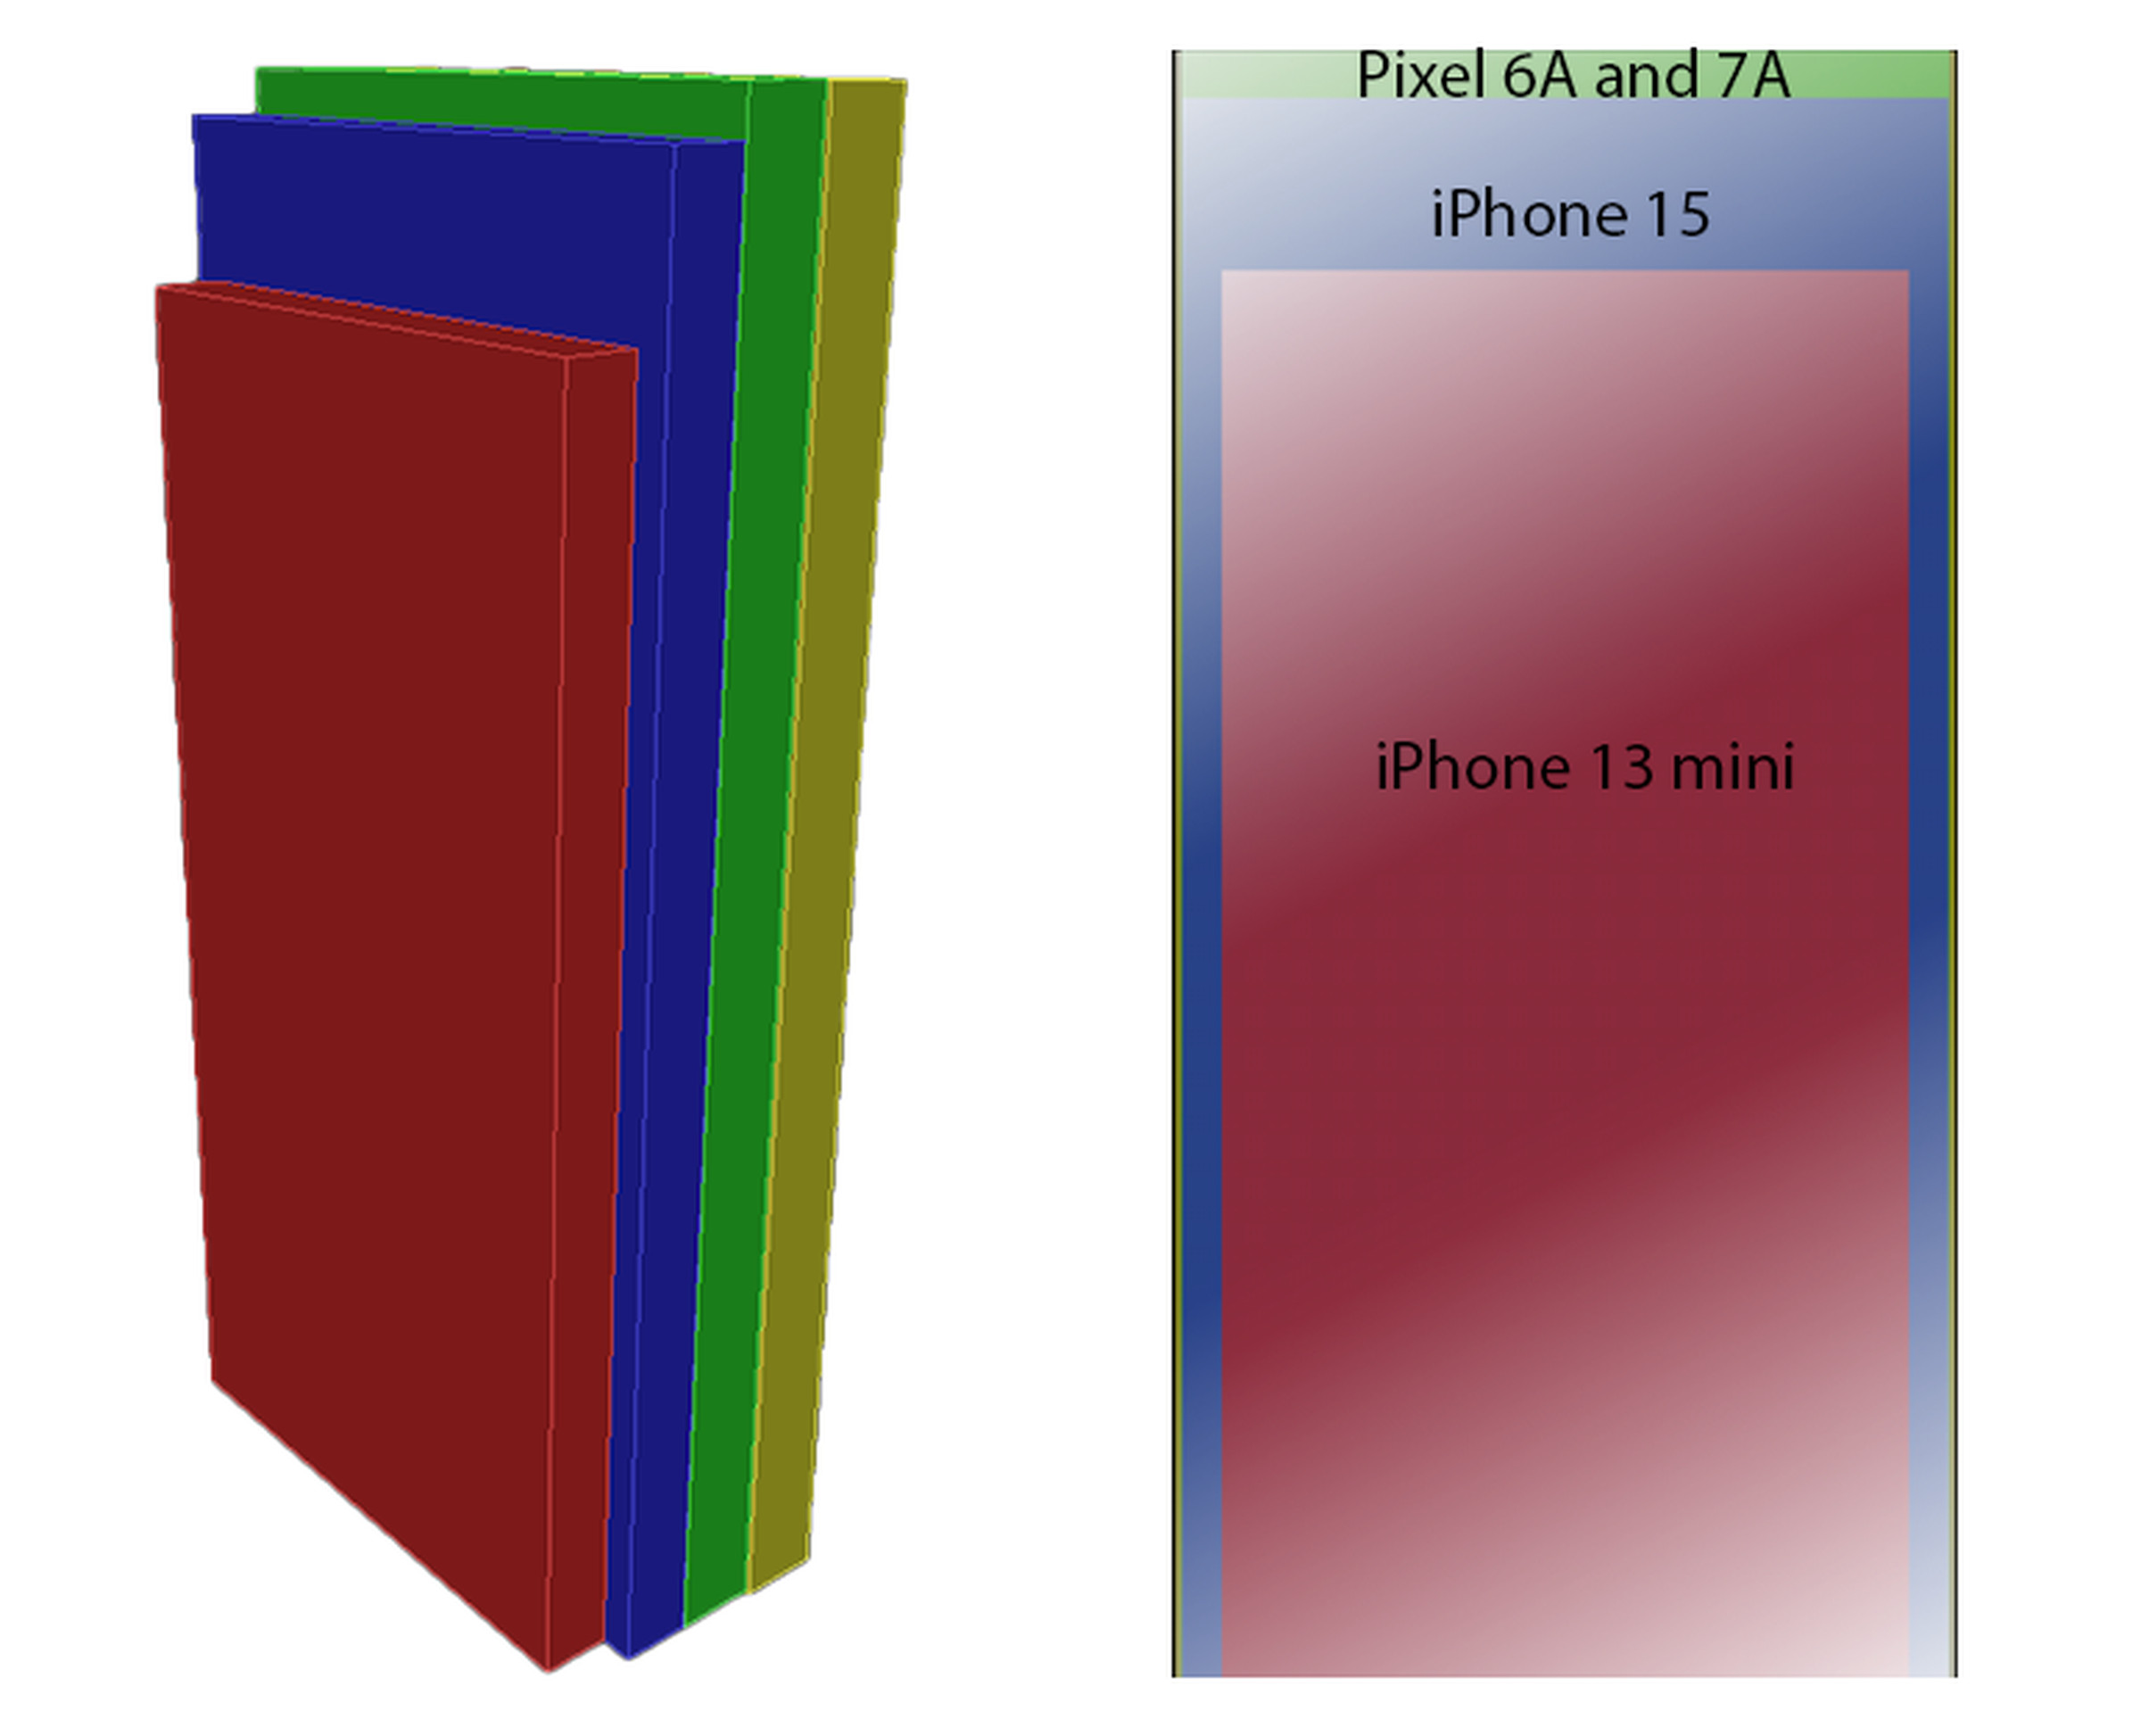 Colored size comparison boxes representing the iPhone 13 Mini, iPhone 15, Pixel 7A and Pixel 6A show the Pixels are larger than the iPhone 15, and way larger than the Mini.